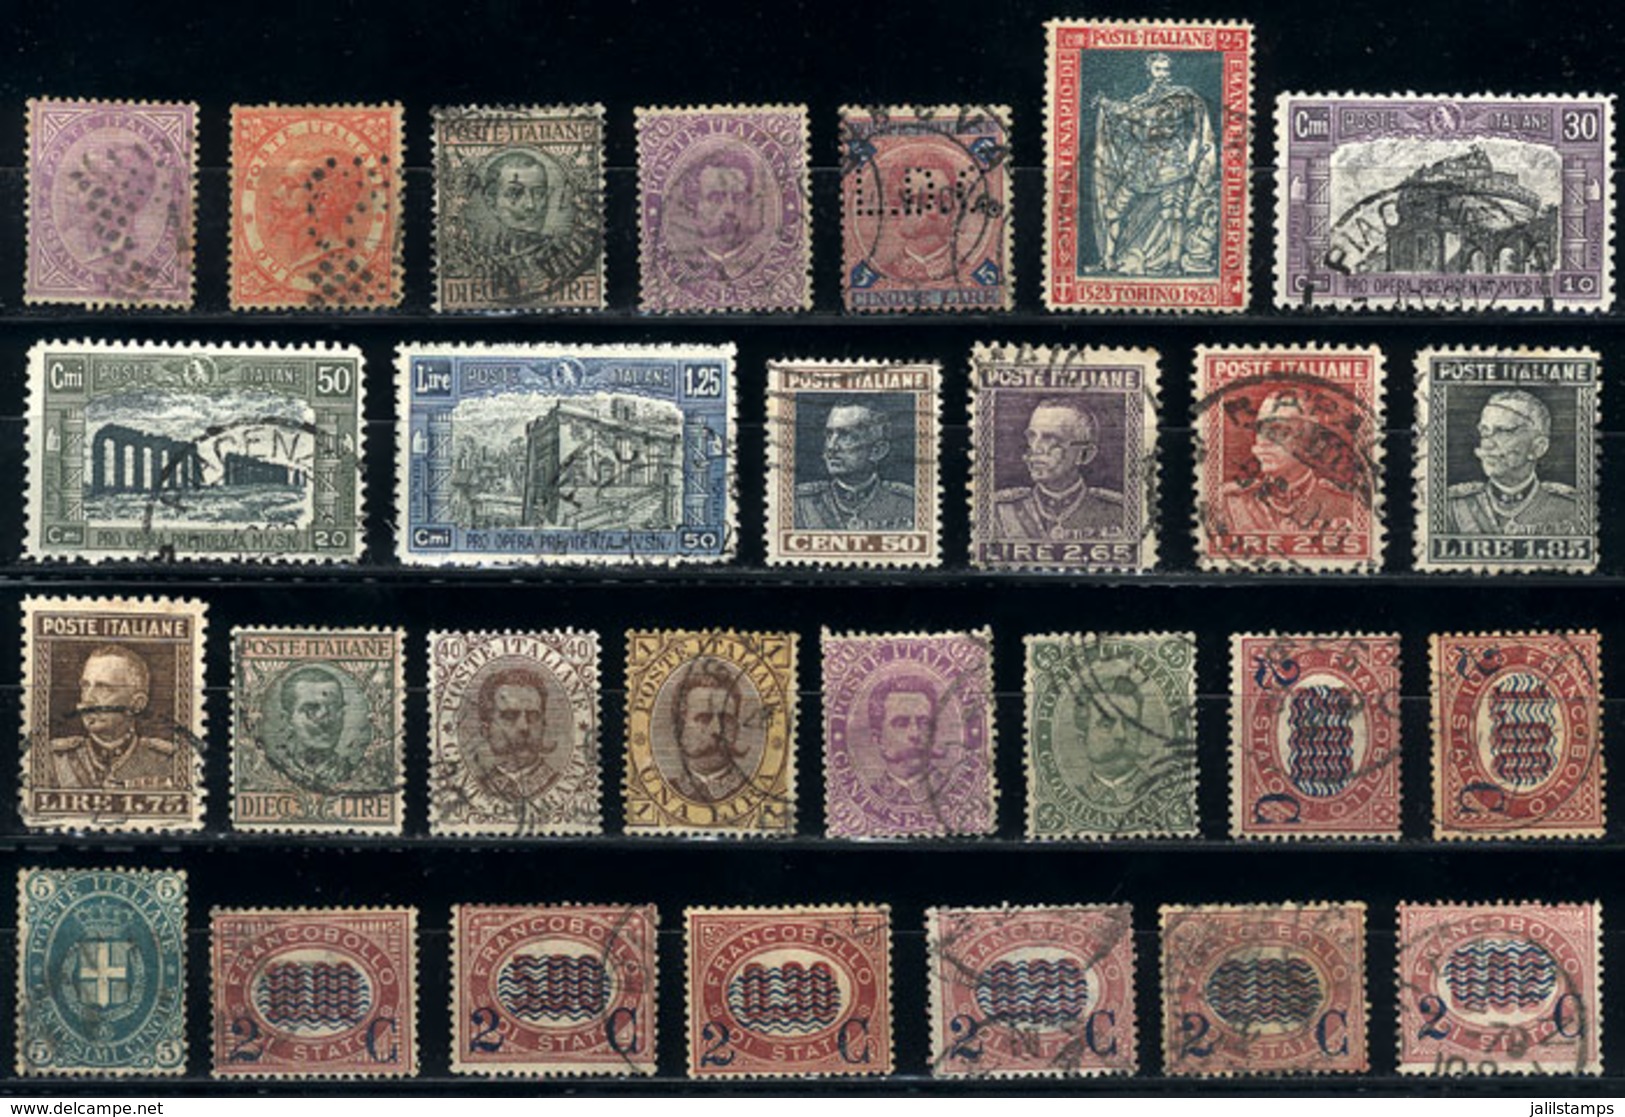 888 ITALY: Interesting Lot Of Old Stamps, Used, Most Of Fine To VF Quality (2 Or 3 With - Non Classés